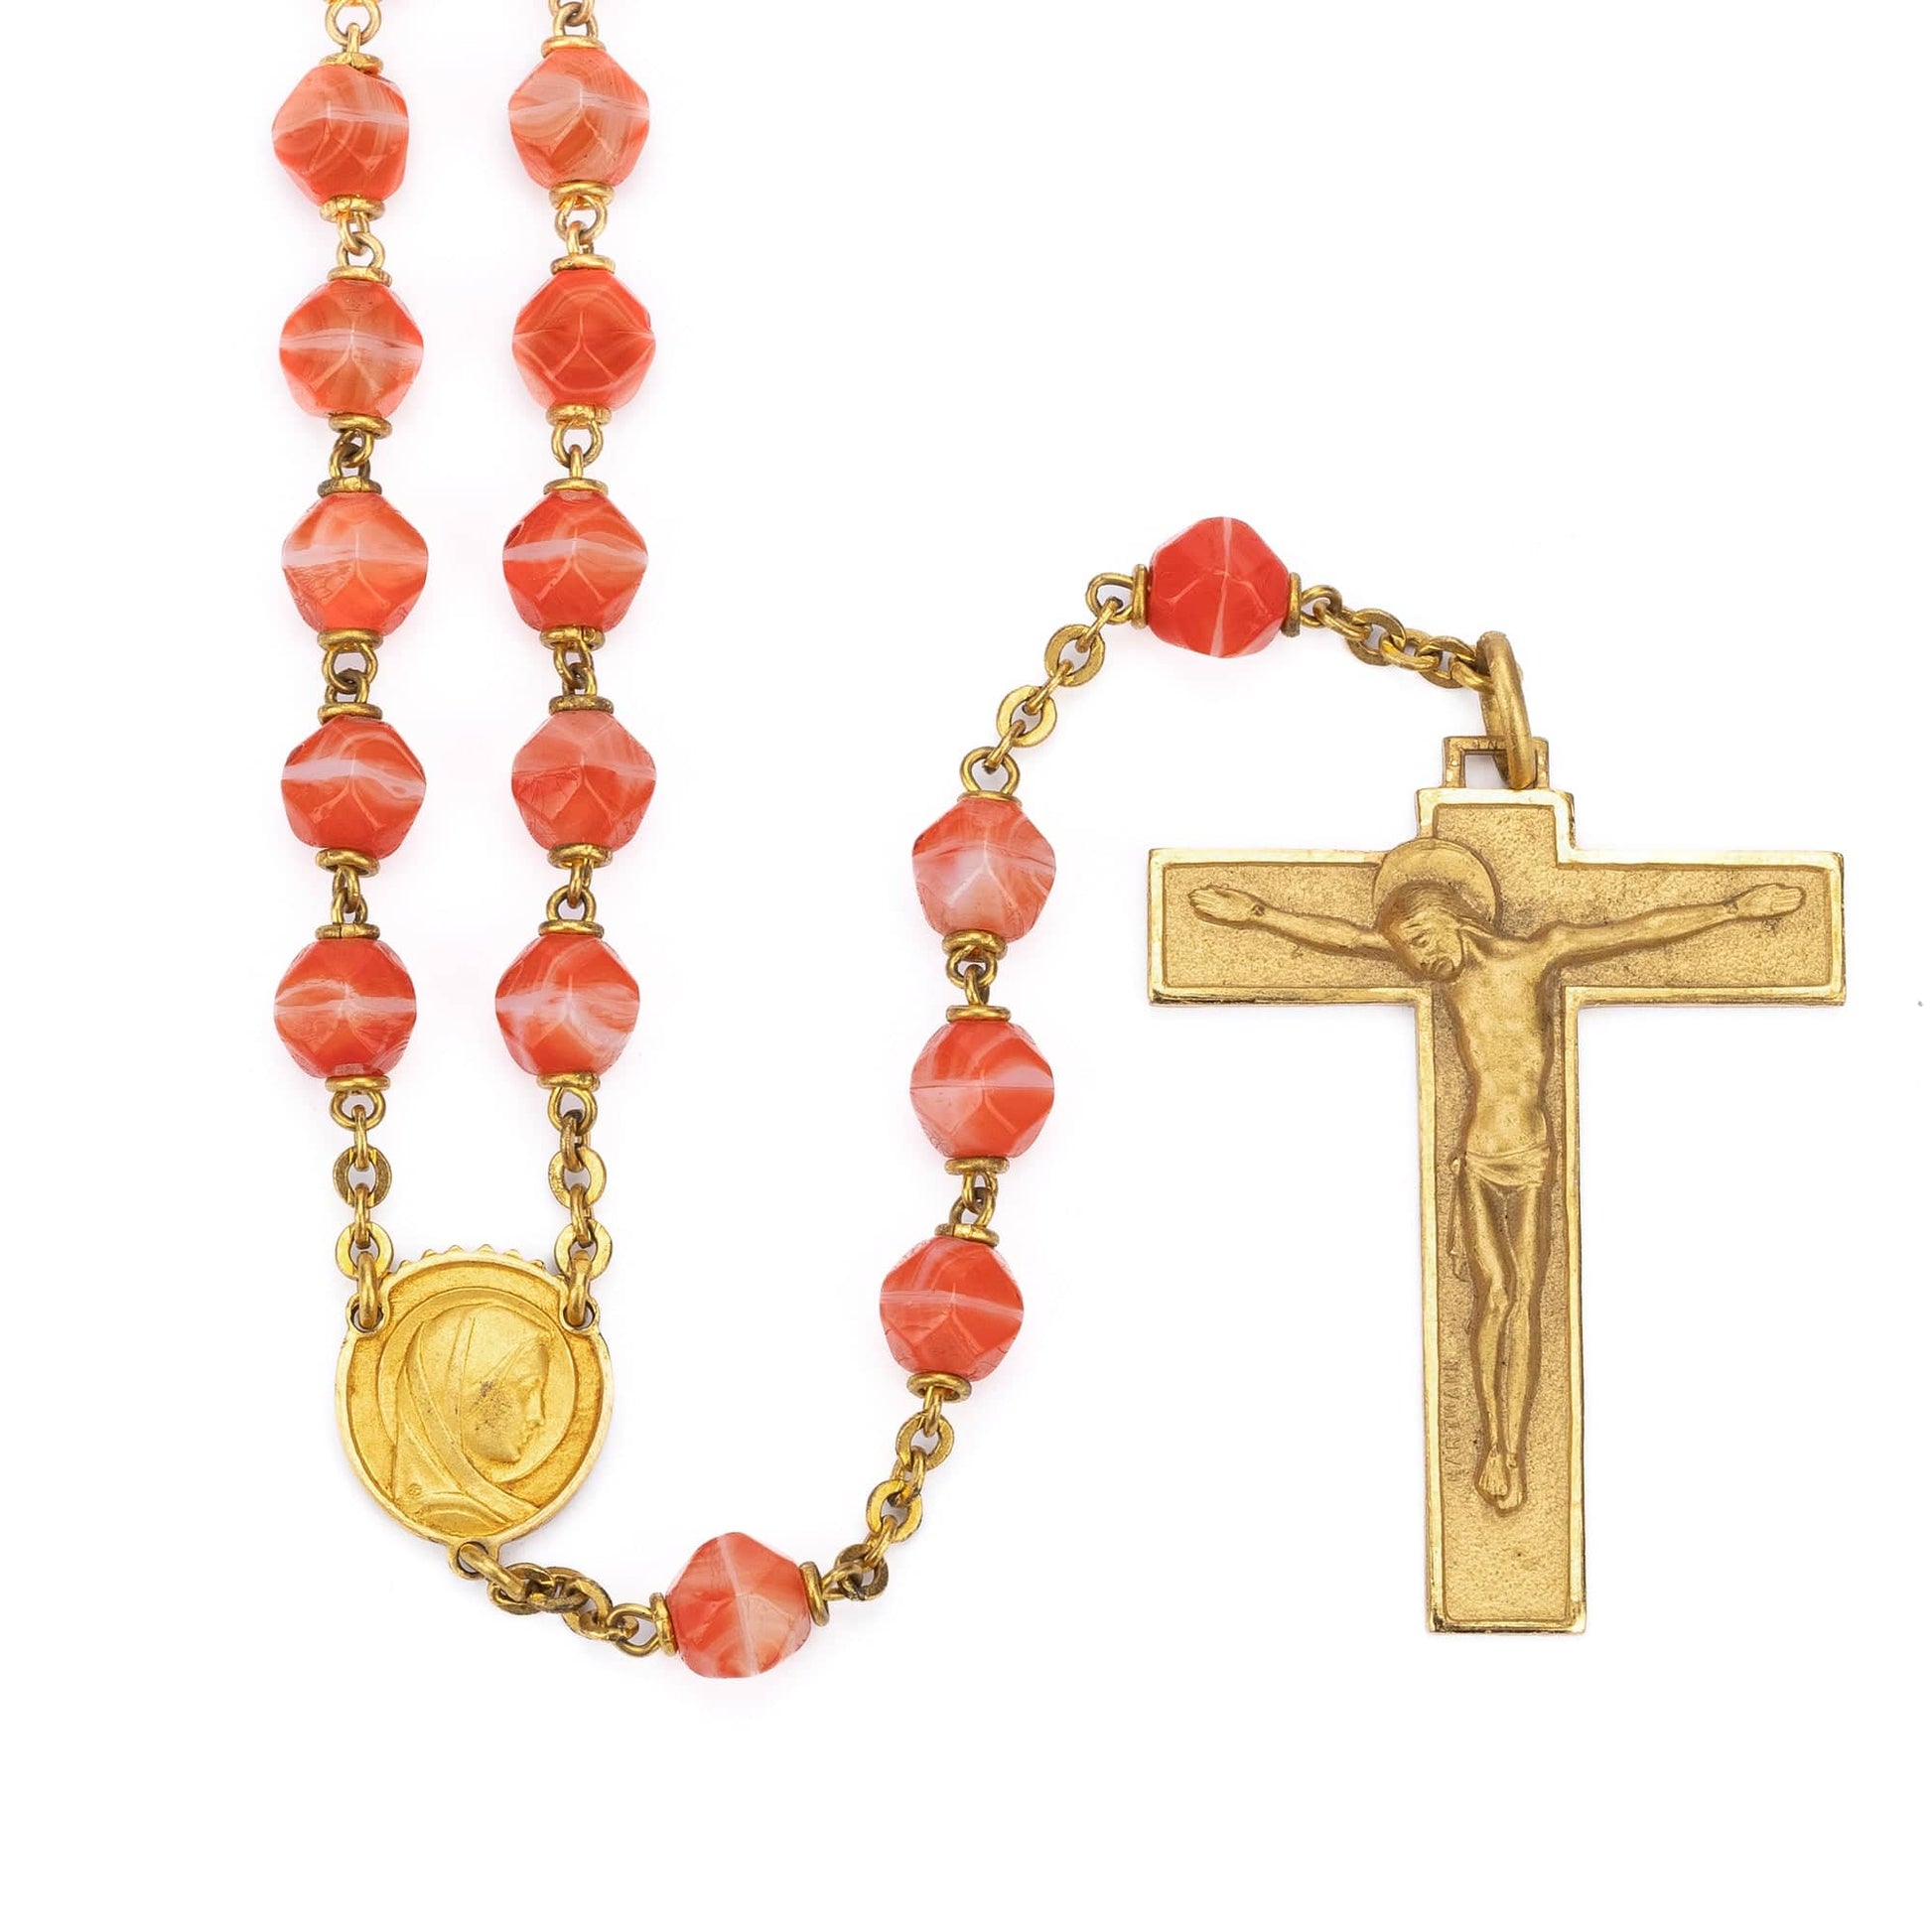 MONDO CATTOLICO Prayer Beads Traditional Orange Rosary Beads in Silver Gilt